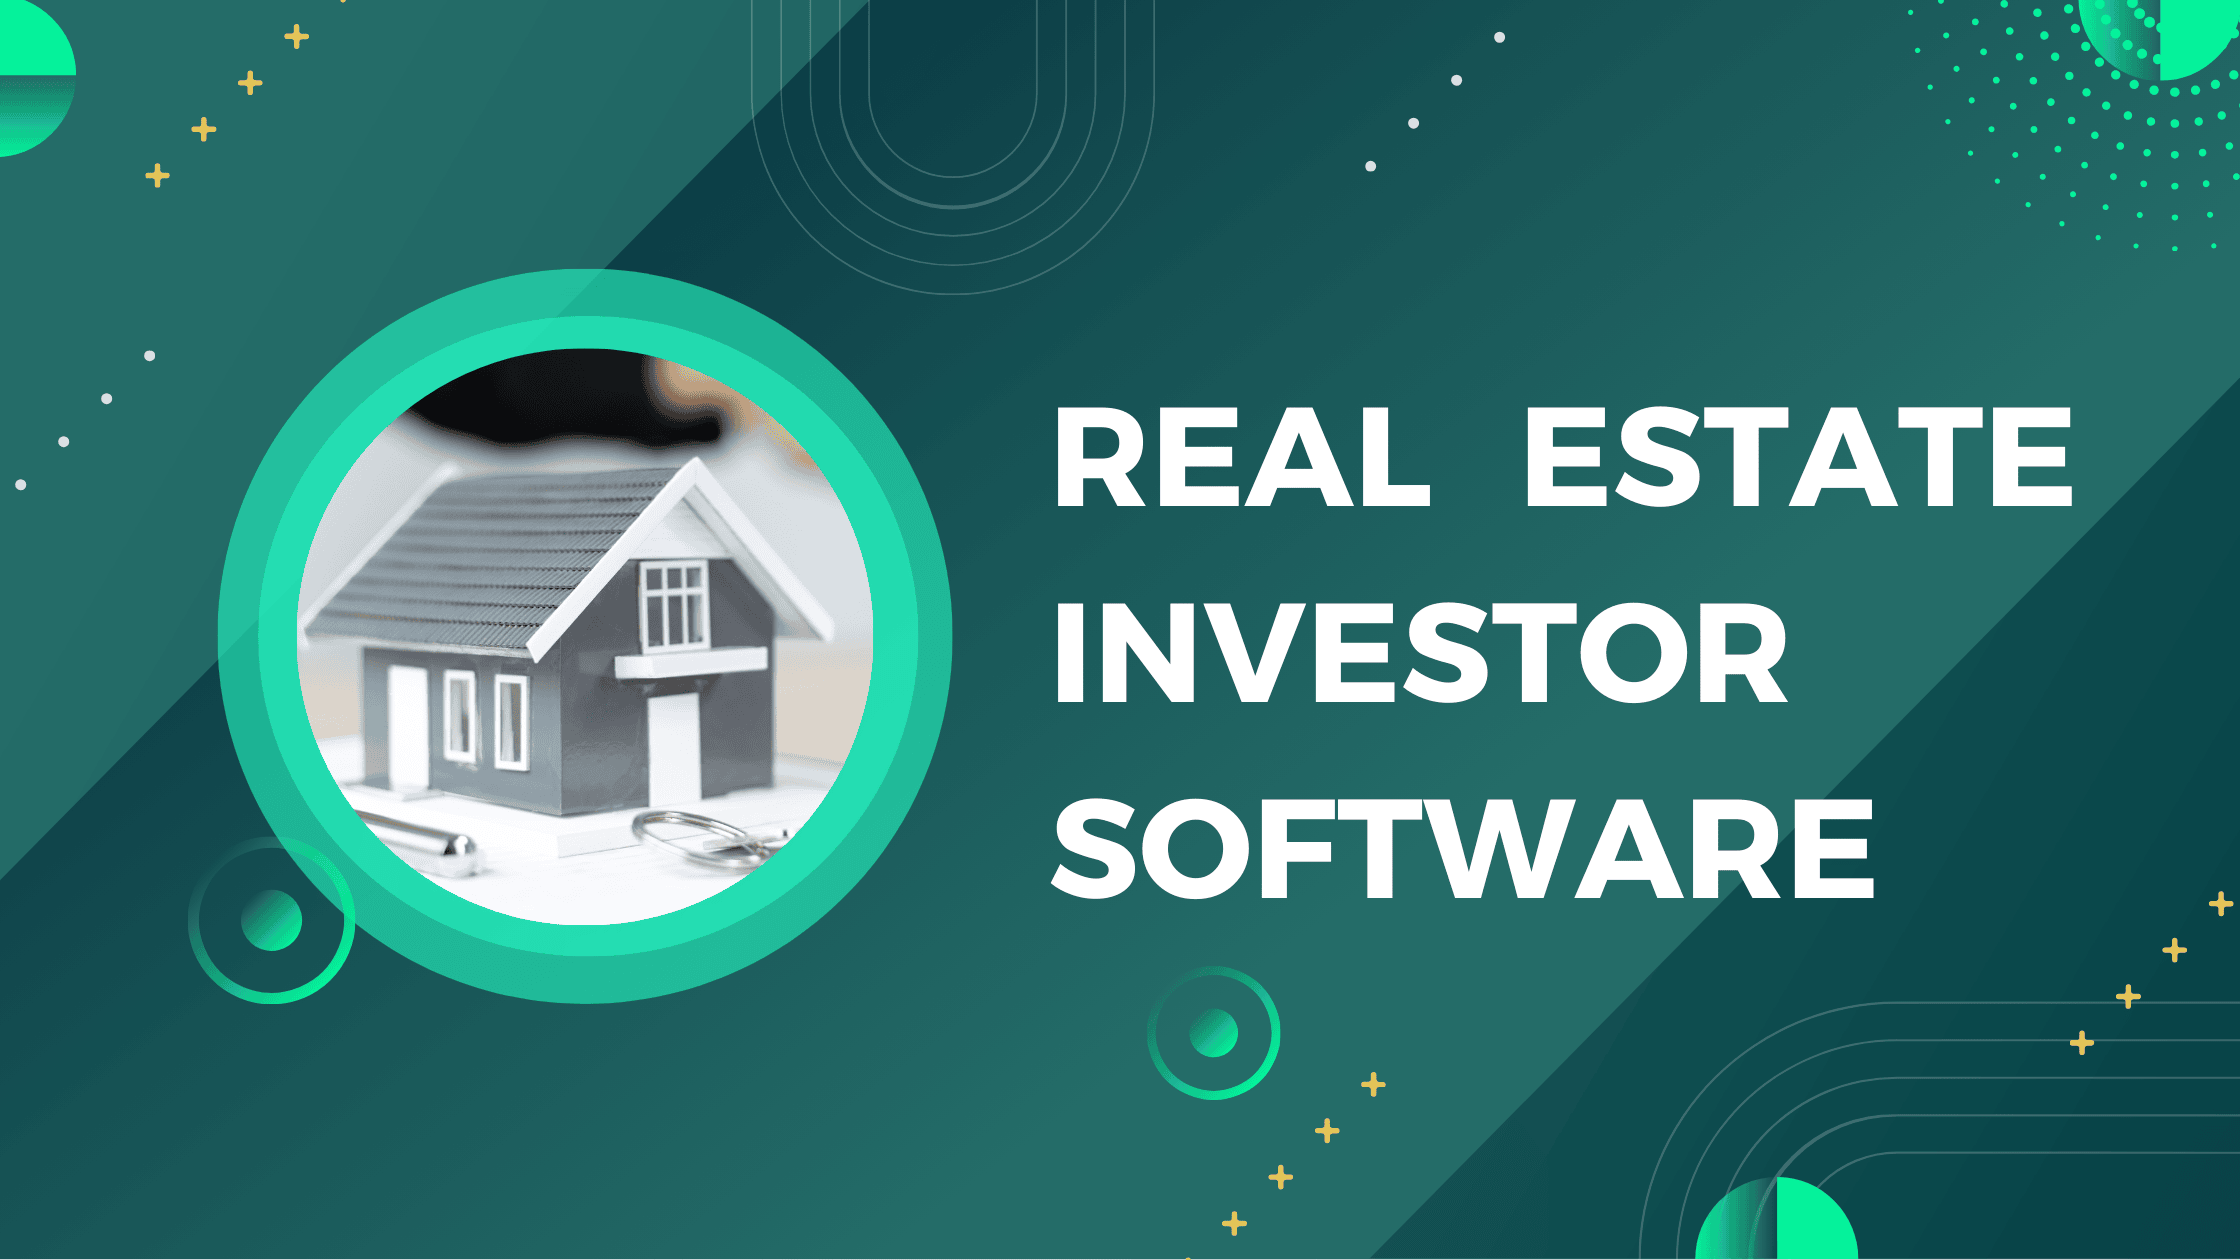 The Best Real Estate Investor Software: 10 Top Choices